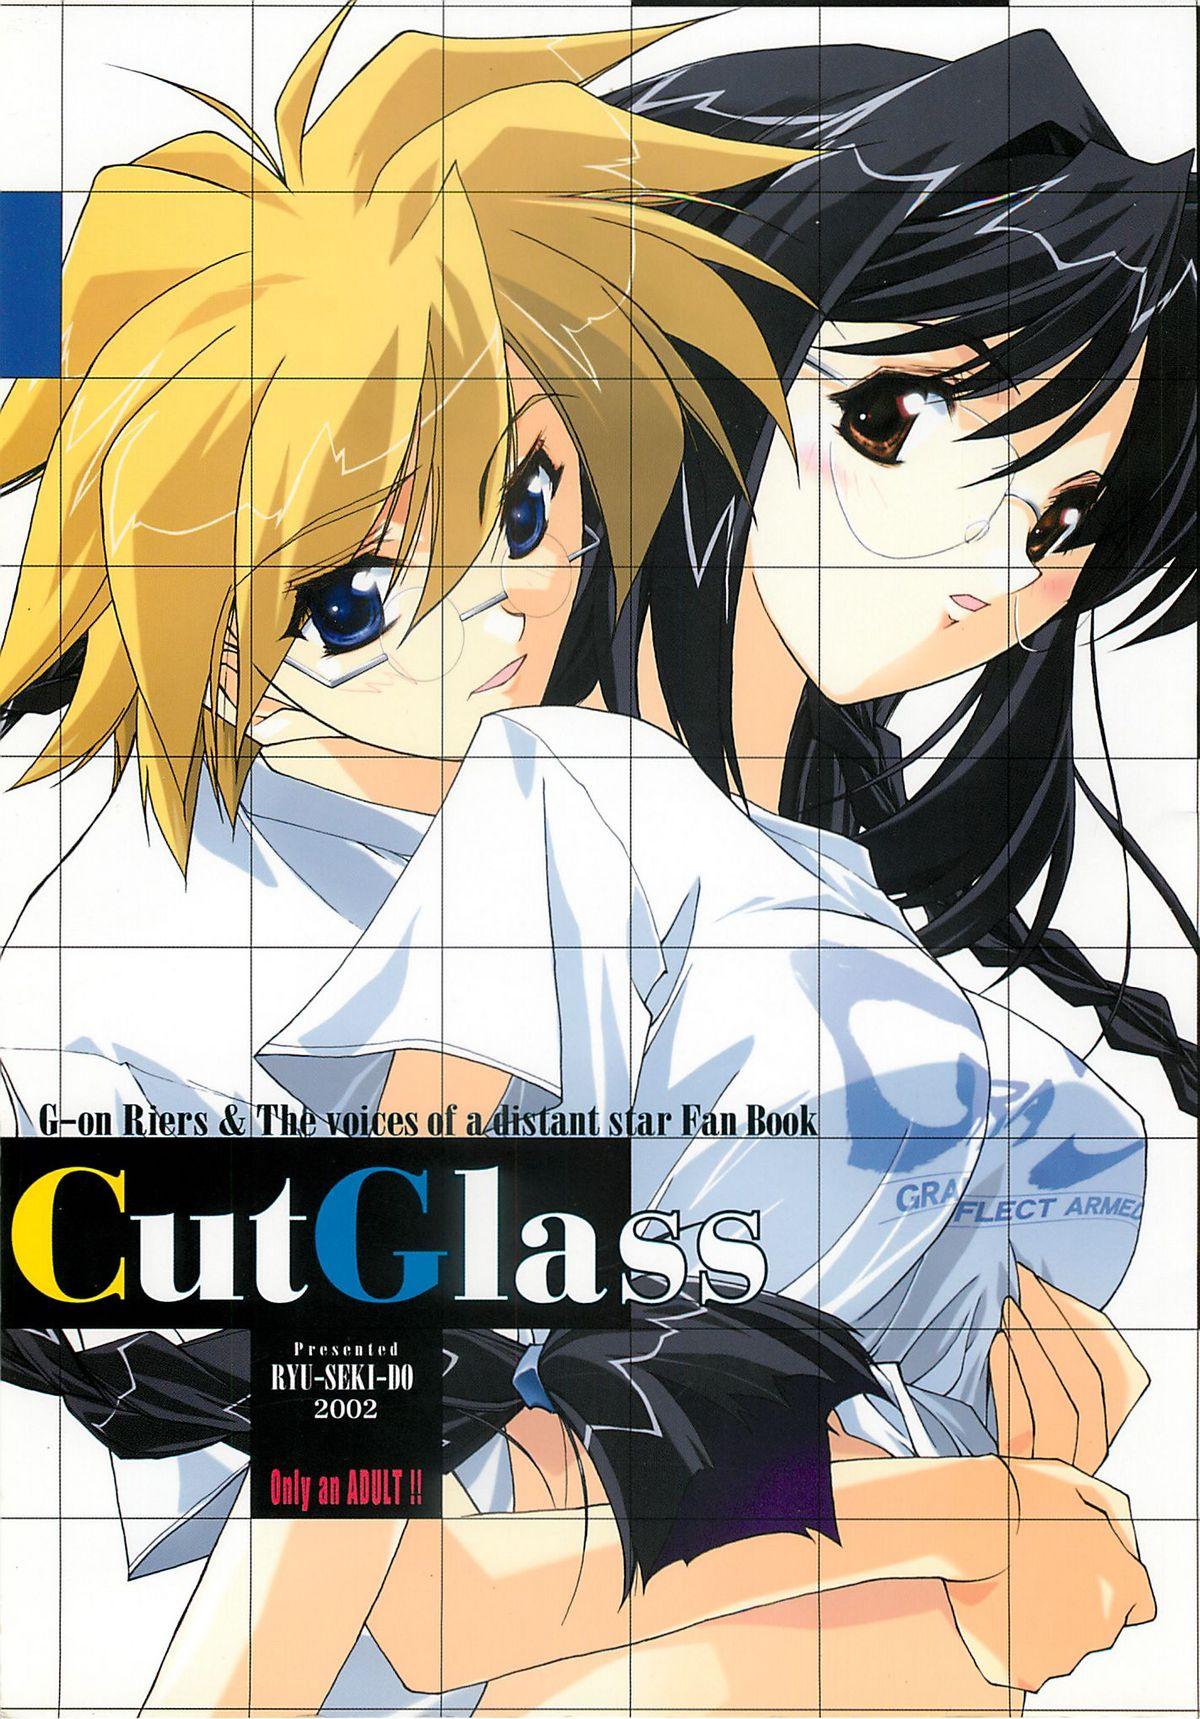 CutGlass [流石堂 (流ひょうご)] (G-on らいだーす, ほしのこえ-The voices of a distant star-) 0